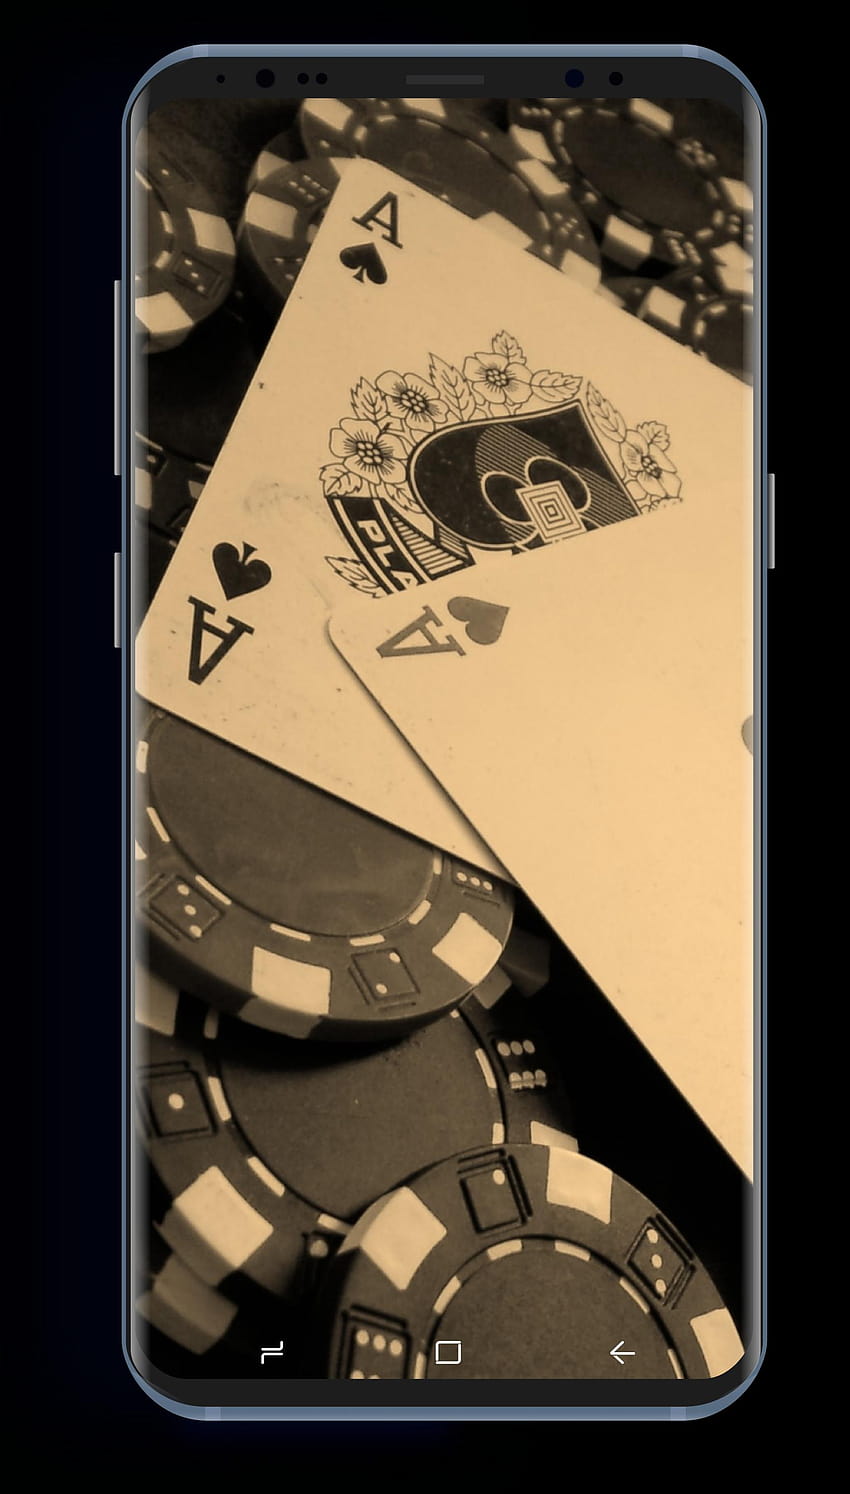 Teen Patti Poker pour Android HD phone wallpaper